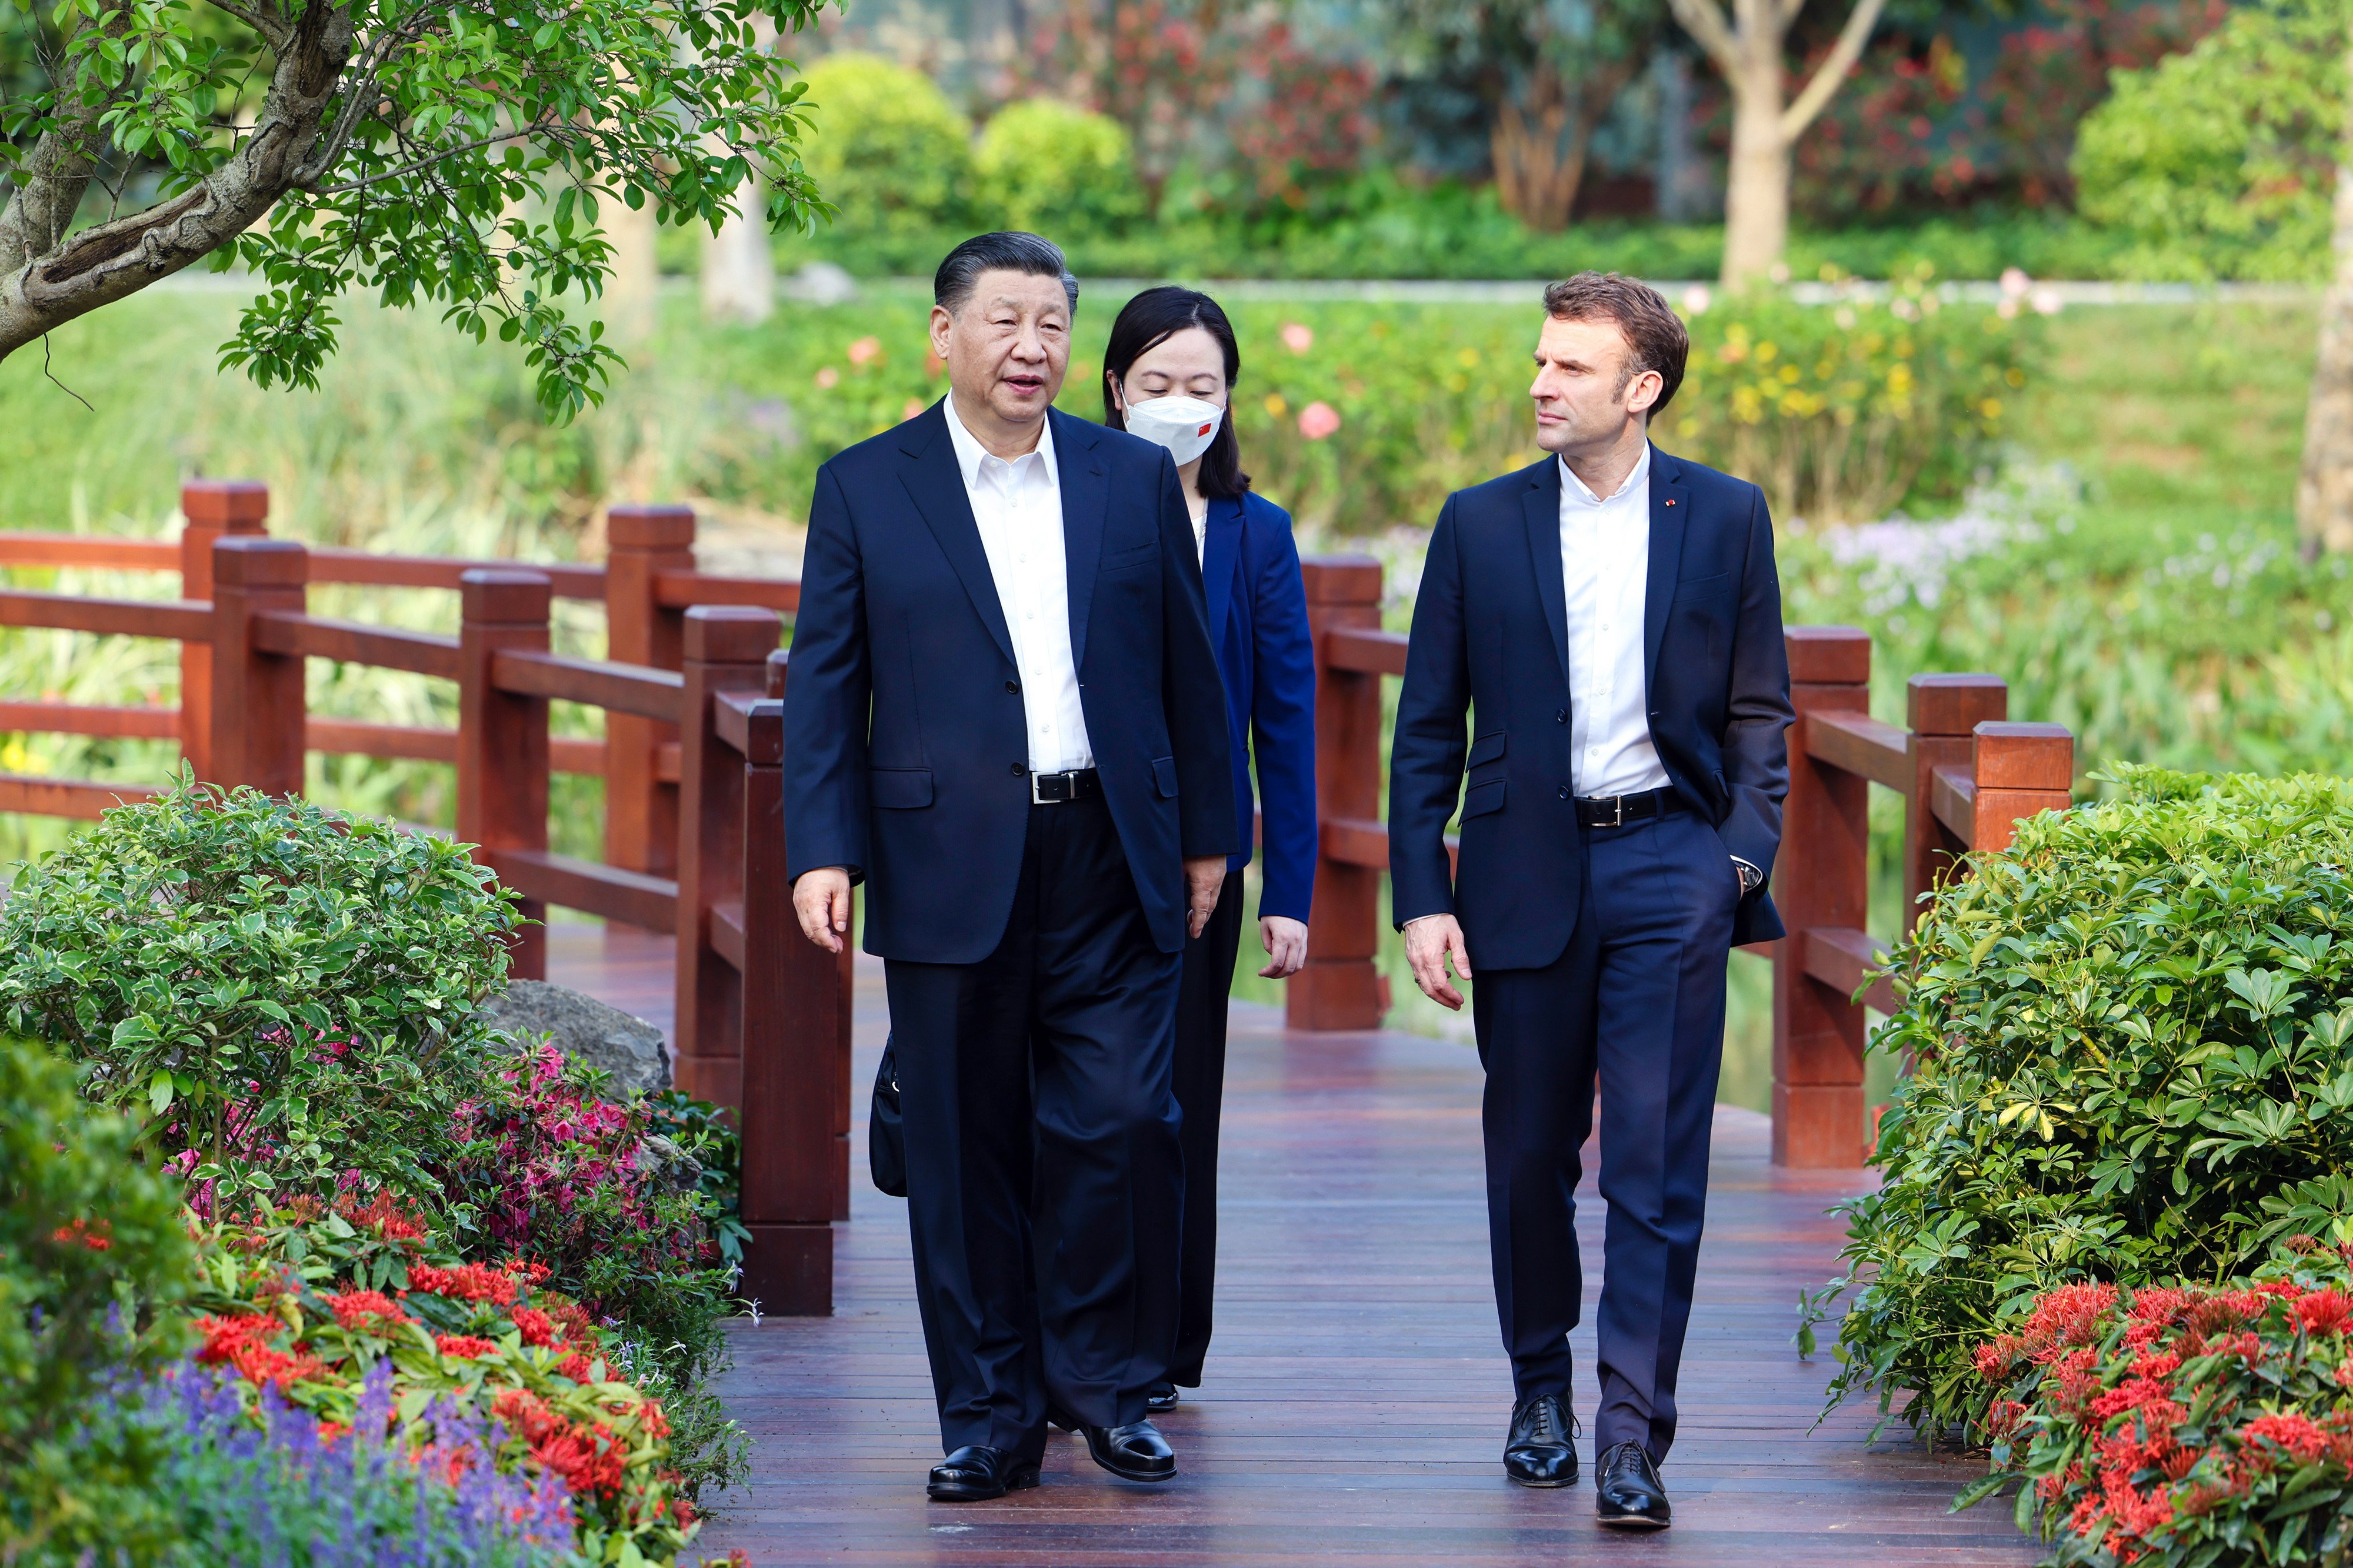 President Xi Jinping (left) and French President Emmanuel Macron chat during a stroll through the Pine Garden in Guangzhou on April 7. Photo: EPA-EFE